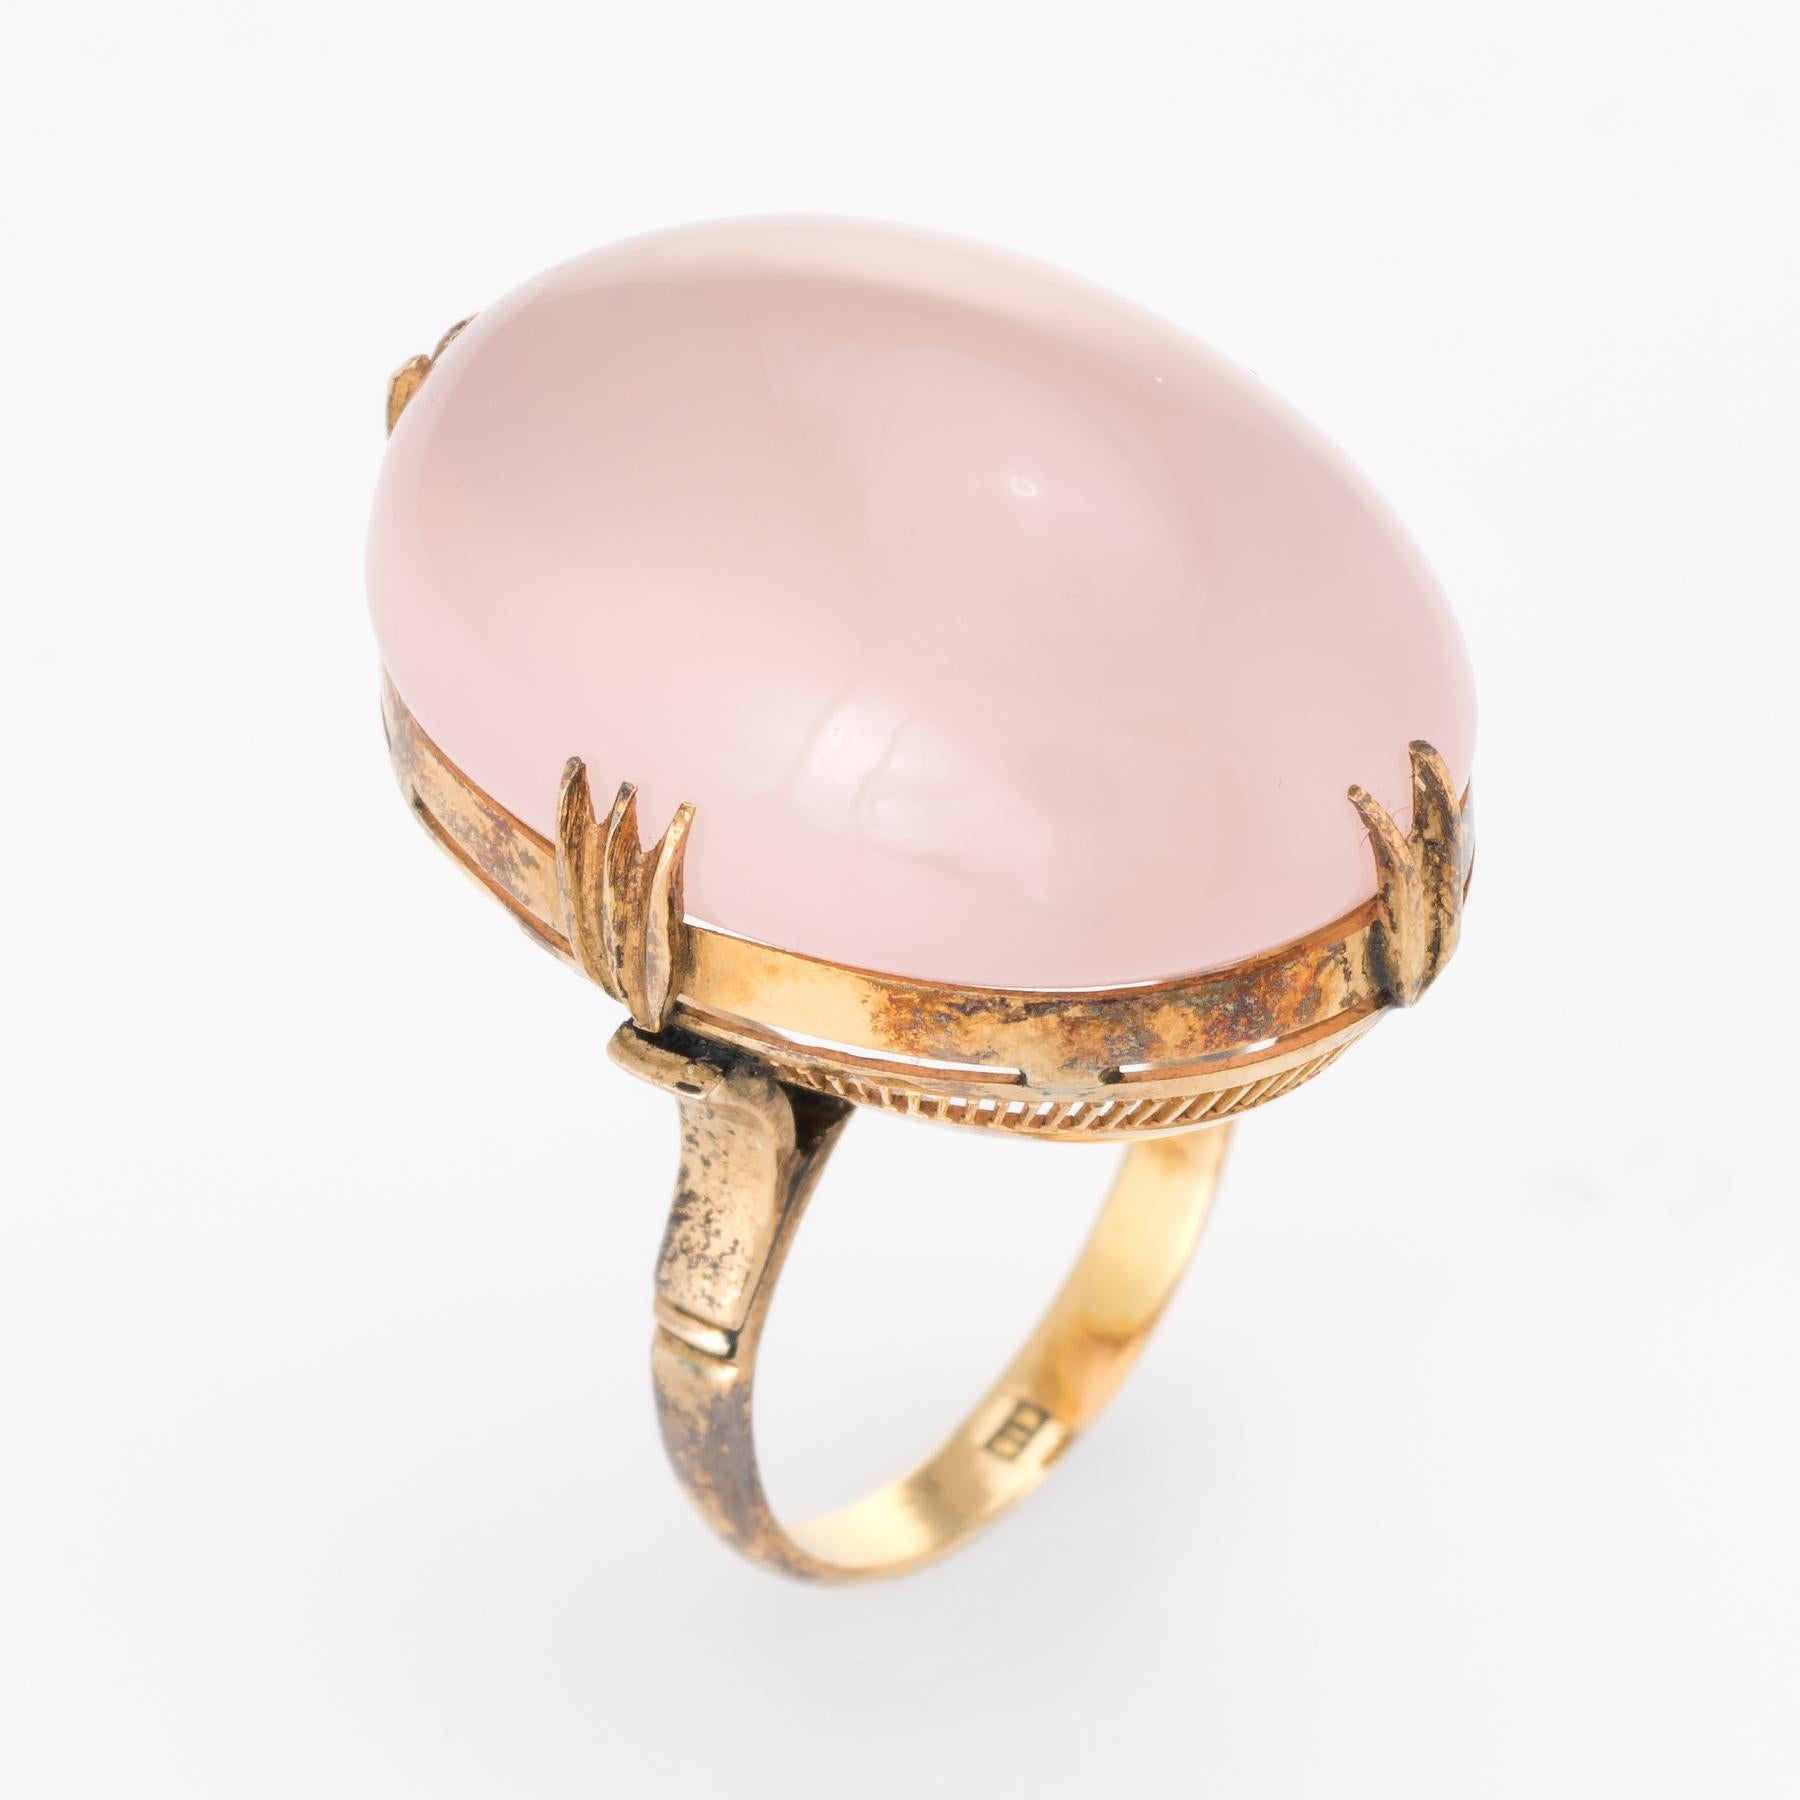 Elegant vintage cocktail ring (circa 1950s to 1960s), crafted in 18 karat yellow gold. 

Centrally mounted cabochon cut rose quartz measures 24mm x 18mm (estimated at 35 carats). The rose quartz is in excellent condition and free of cracks or chips.